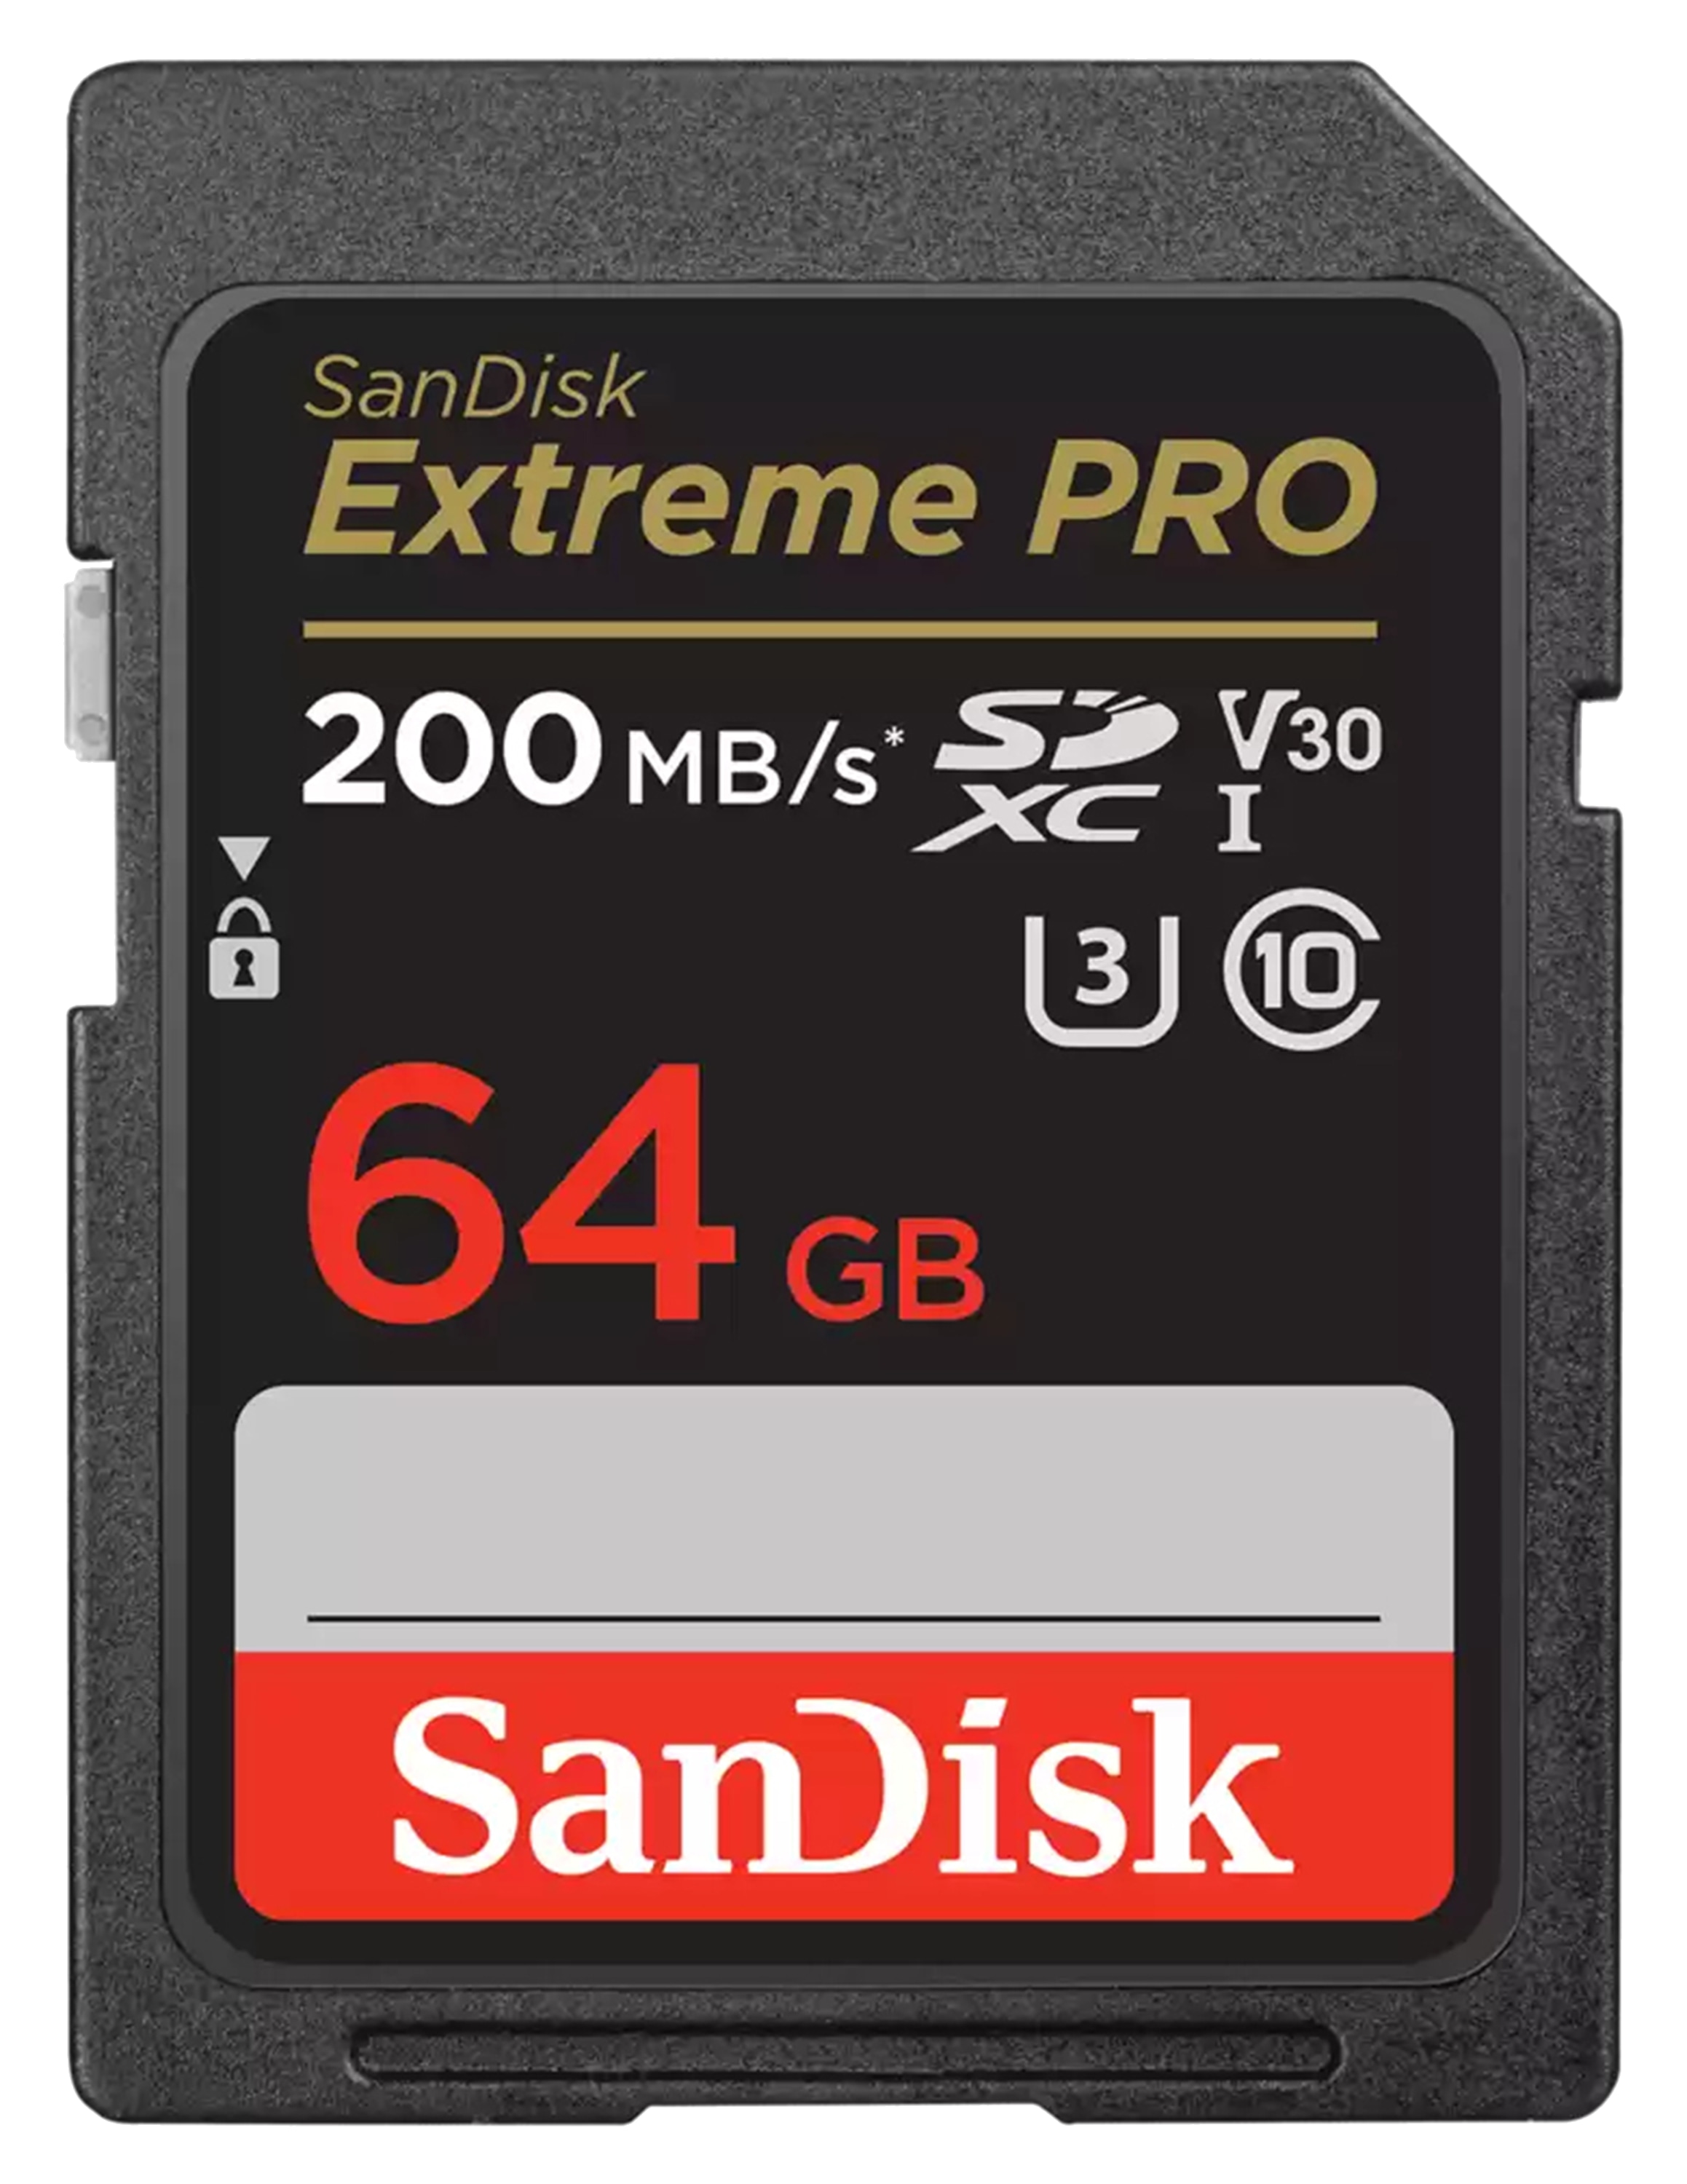 SANDISK SD-Card Extreme Pro 64GB